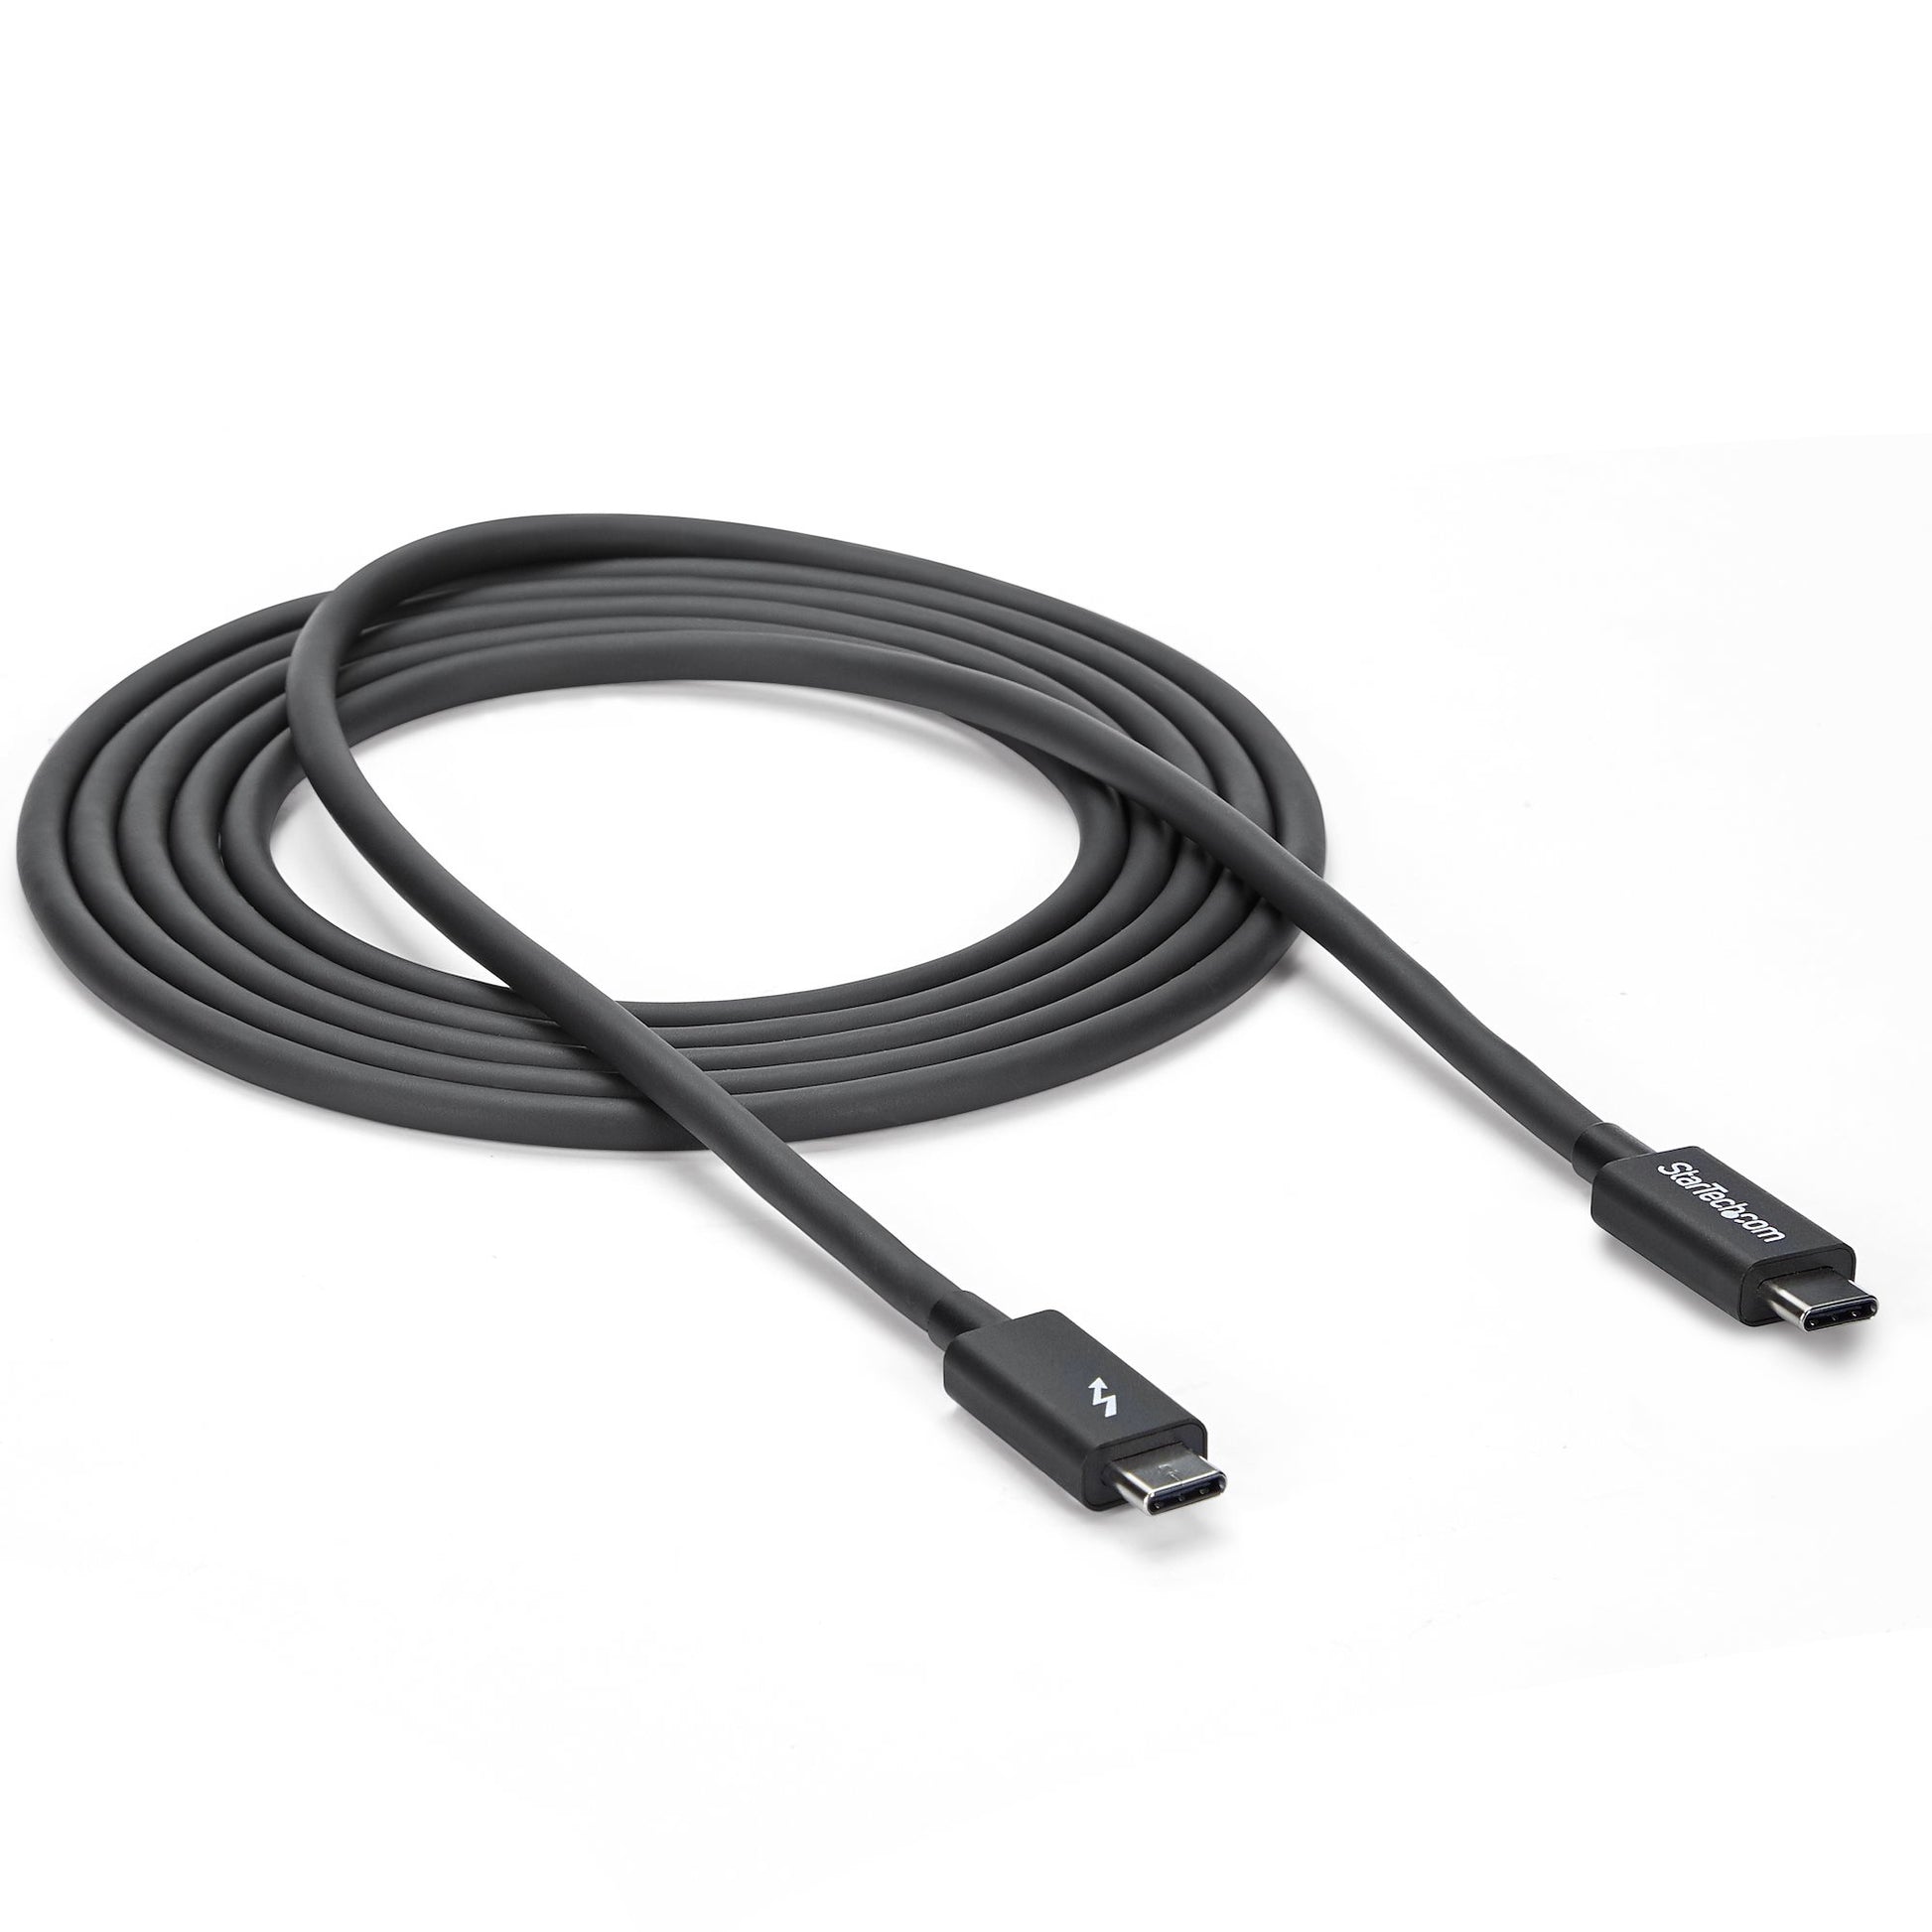 StarTech.com 2m Thunderbolt 3 (20Gbps) USB-C Cable - Thunderbolt, USB, and DisplayPort Compatible-4